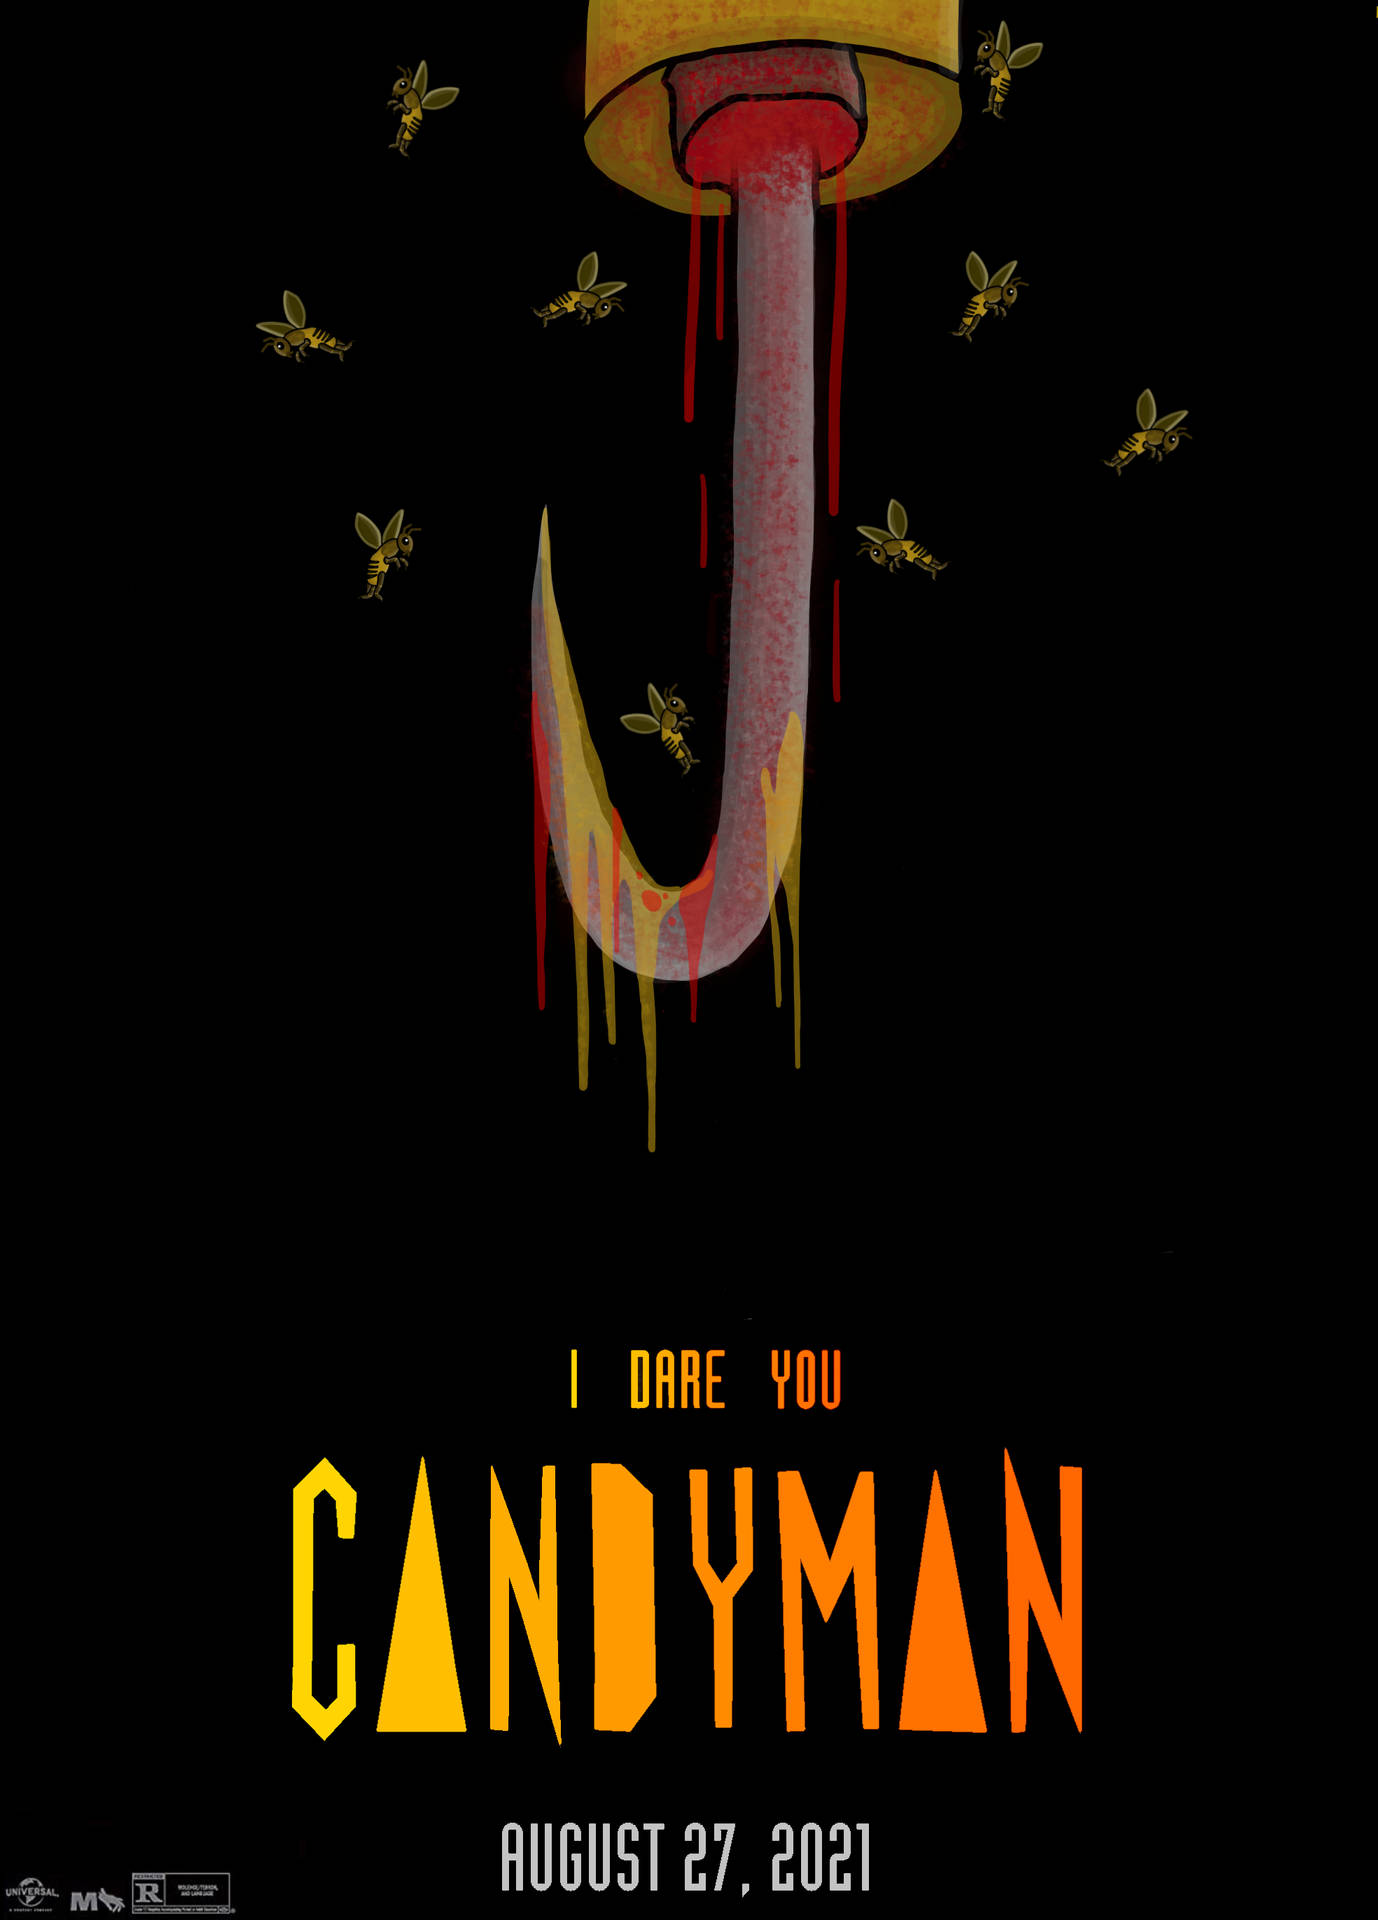 Candyman 2021 Film Poster Background